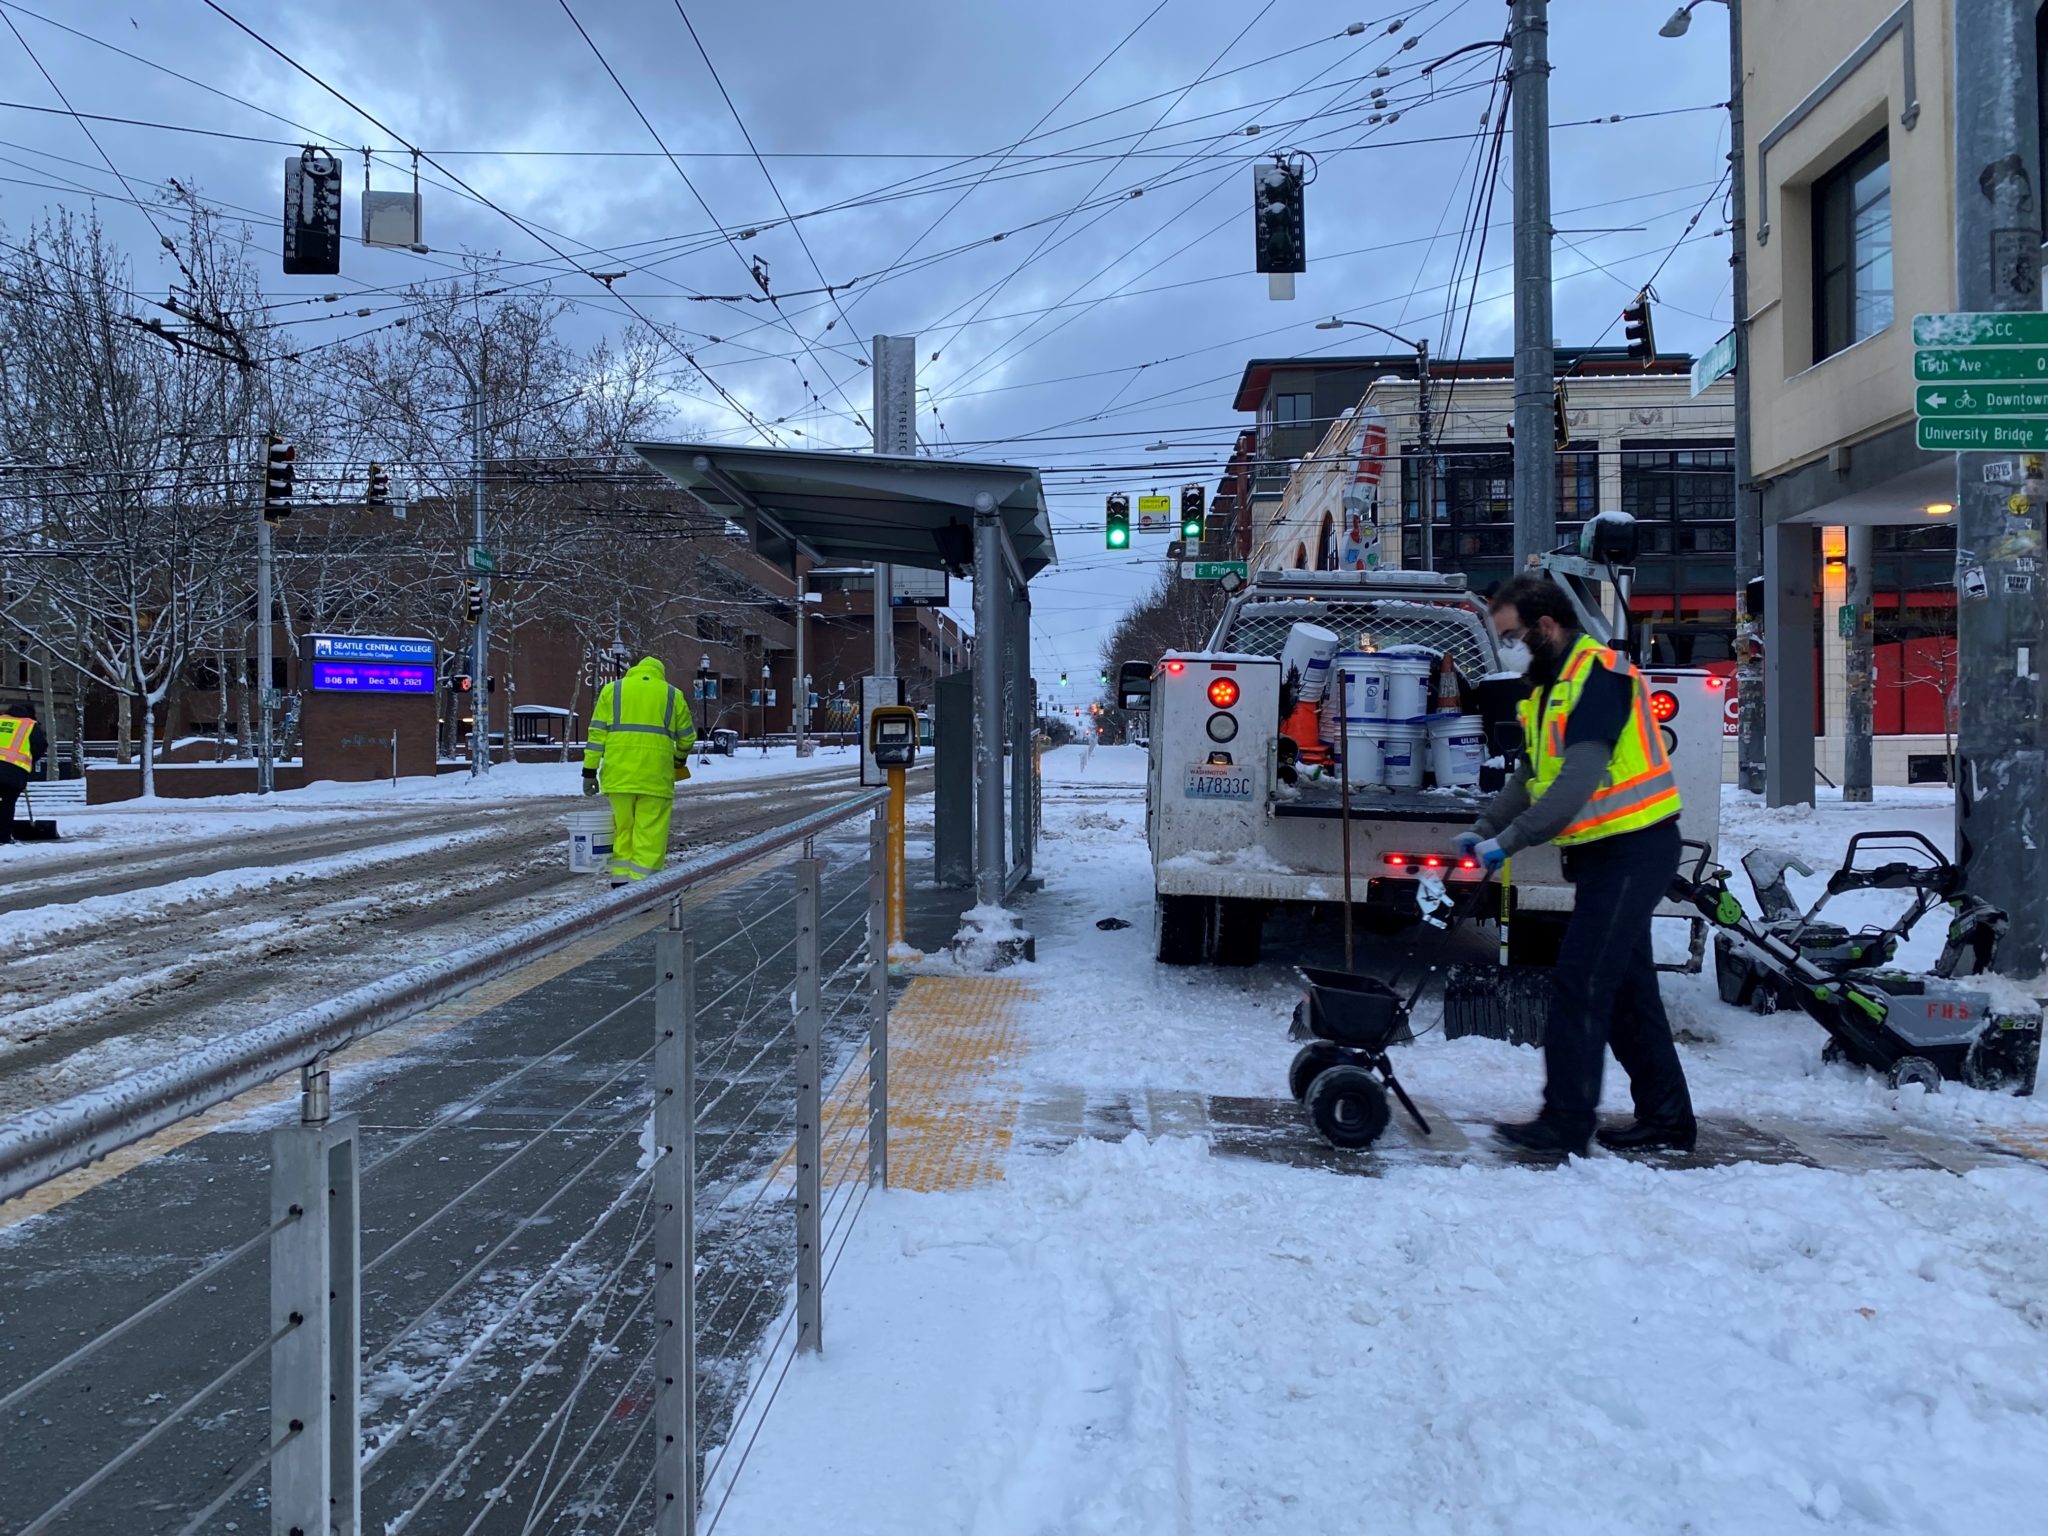 Two workers clear a path to a Seattle Streetcar station in Seattle' Capitol Hill neighborhood, and help de-ice the street nearby. Work trucks and large buildings near the Seattle Central College are visible in the background.